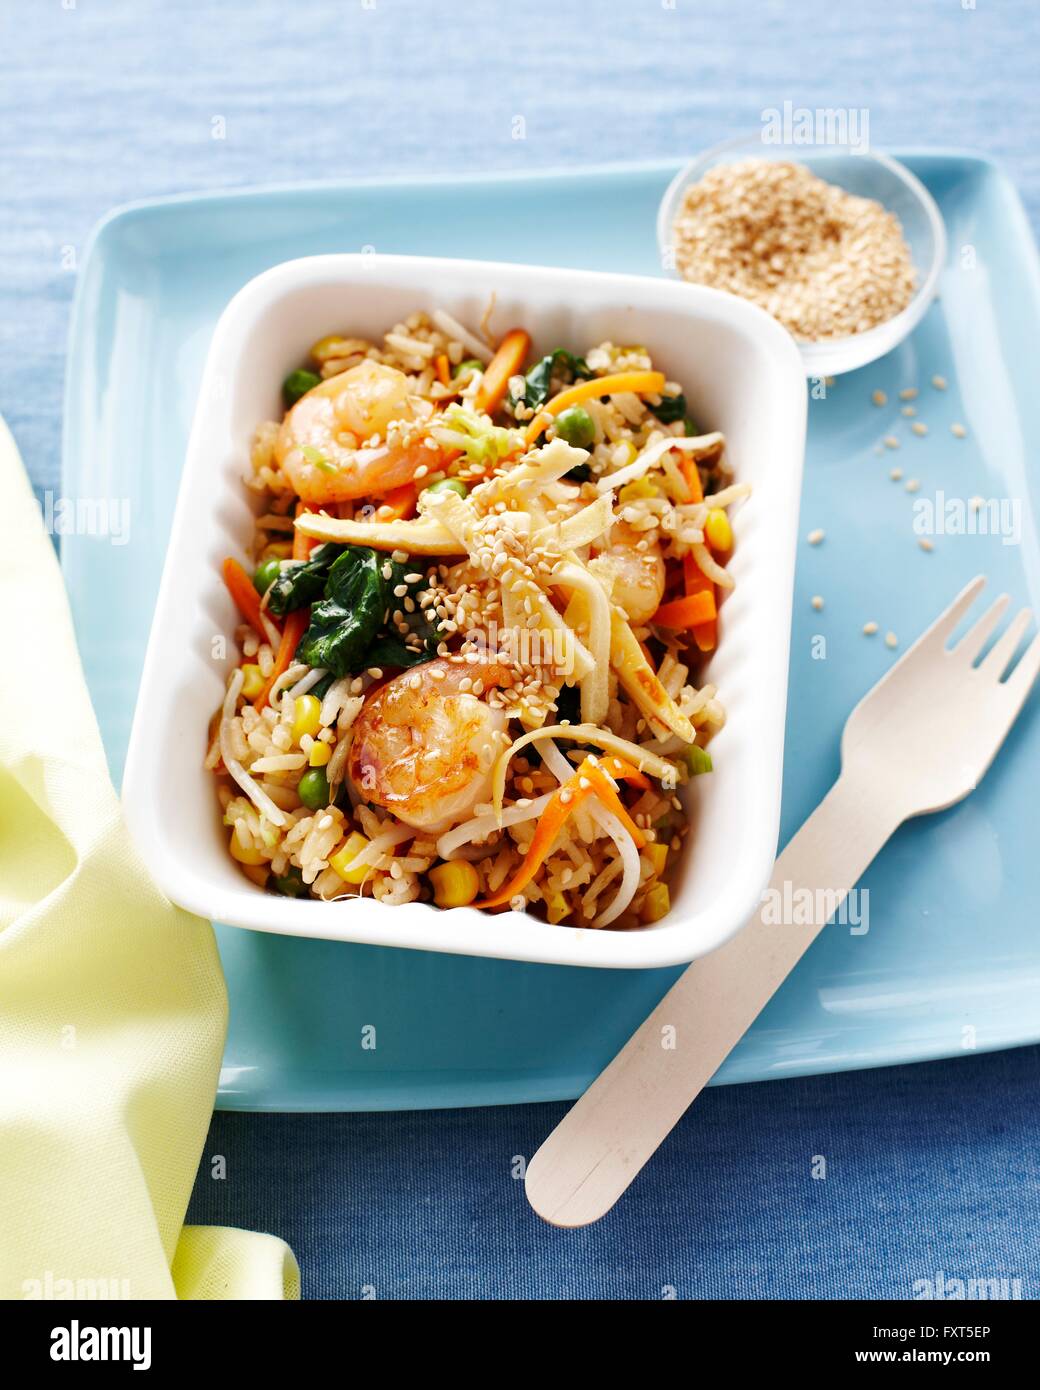 https://c8.alamy.com/comp/FXT5EP/prawn-egg-fried-rice-in-fast-food-container-kids-lunch-idea-FXT5EP.jpg